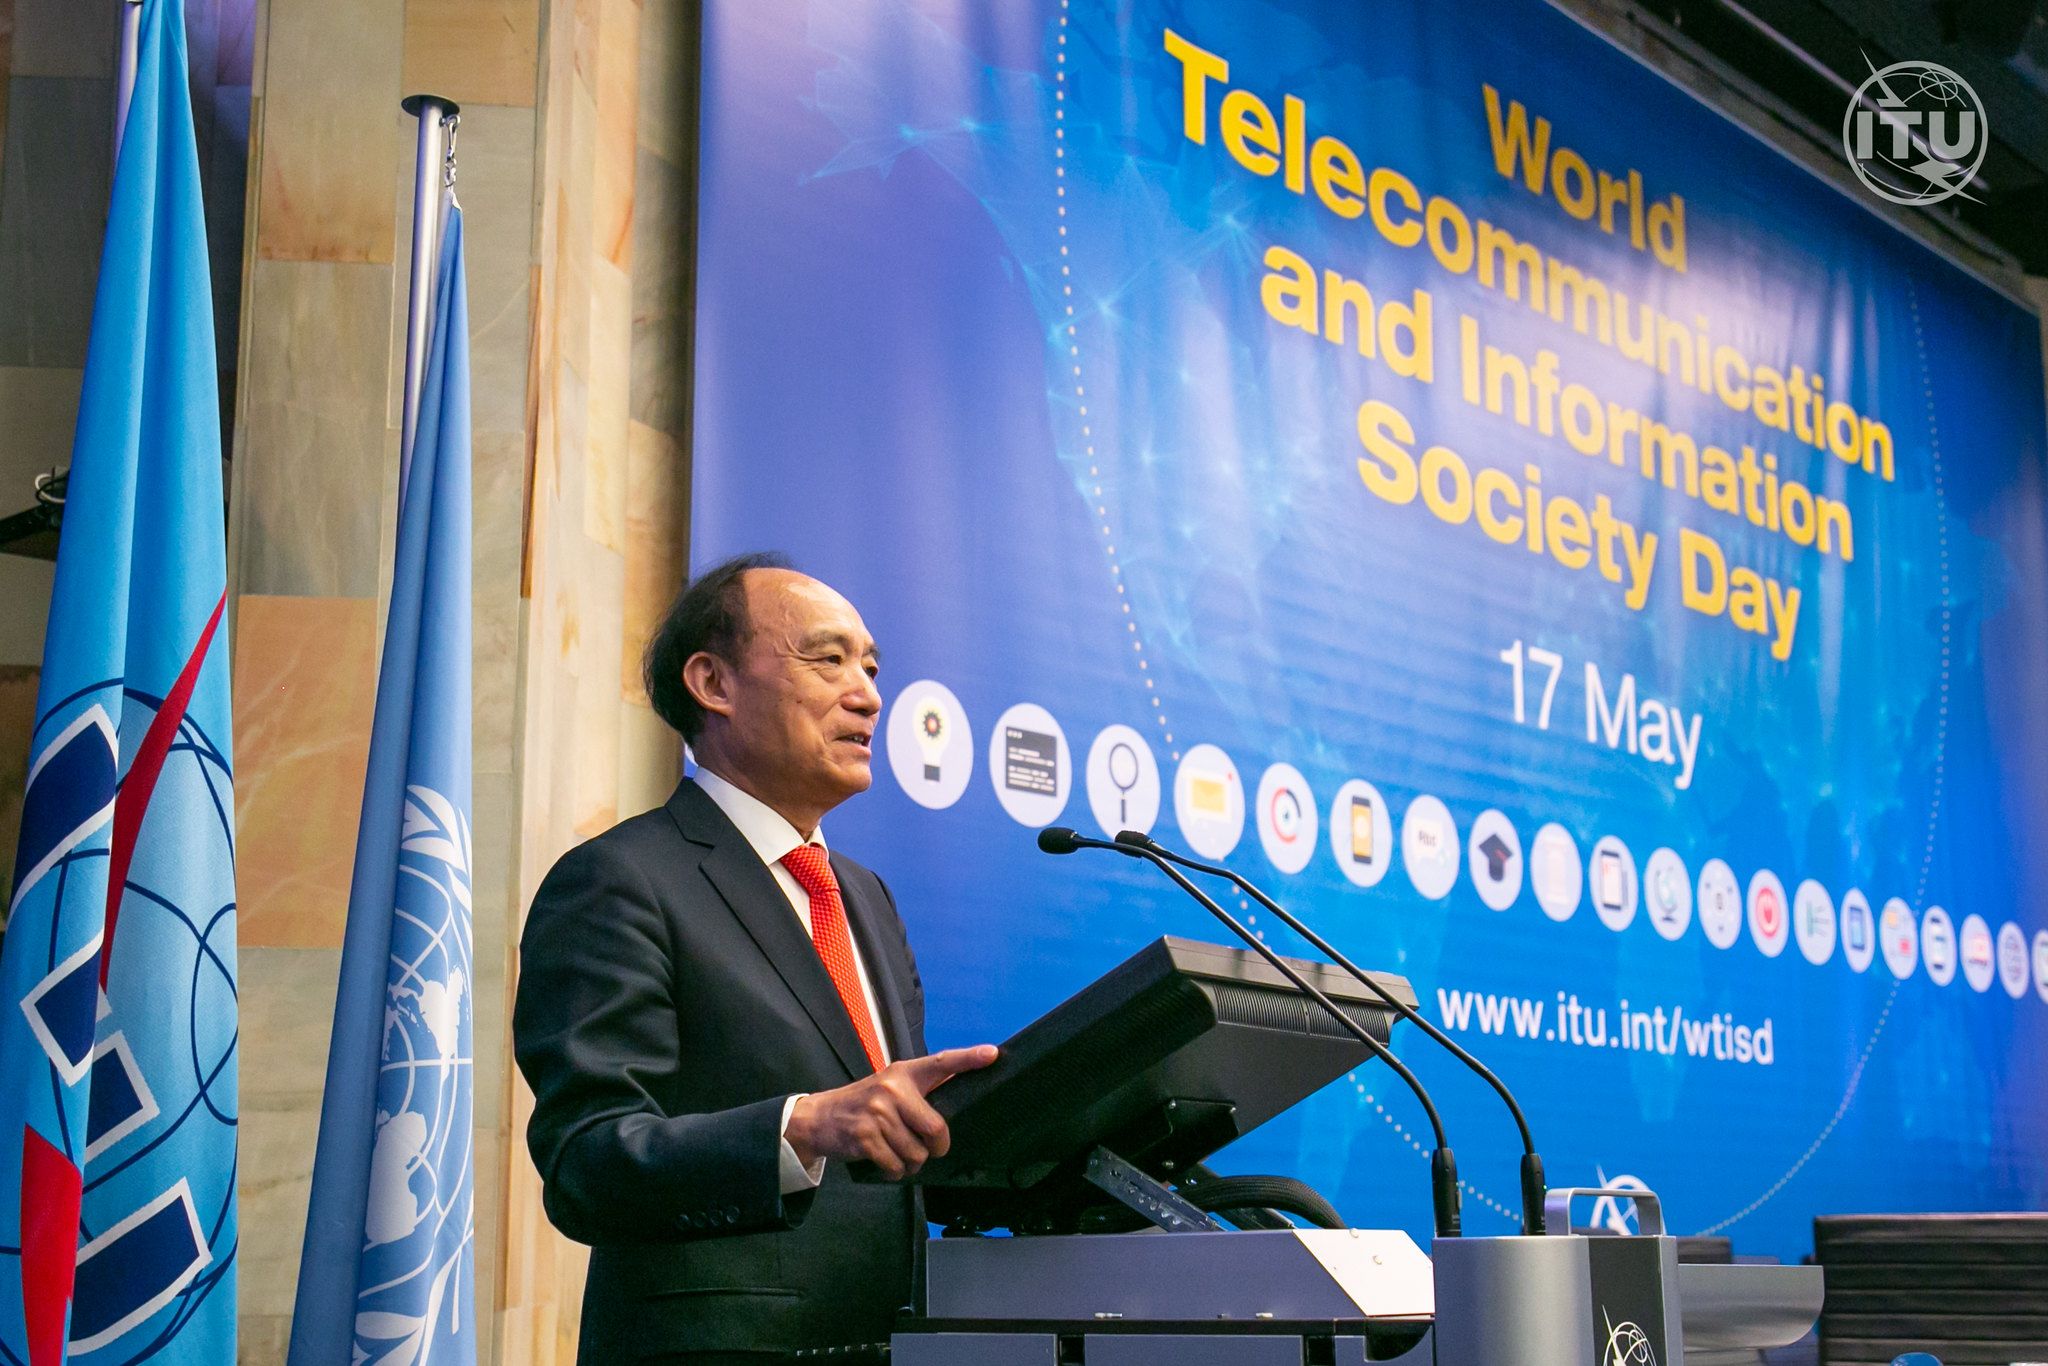 My message on World Telecommunication and Information Society Day featured image